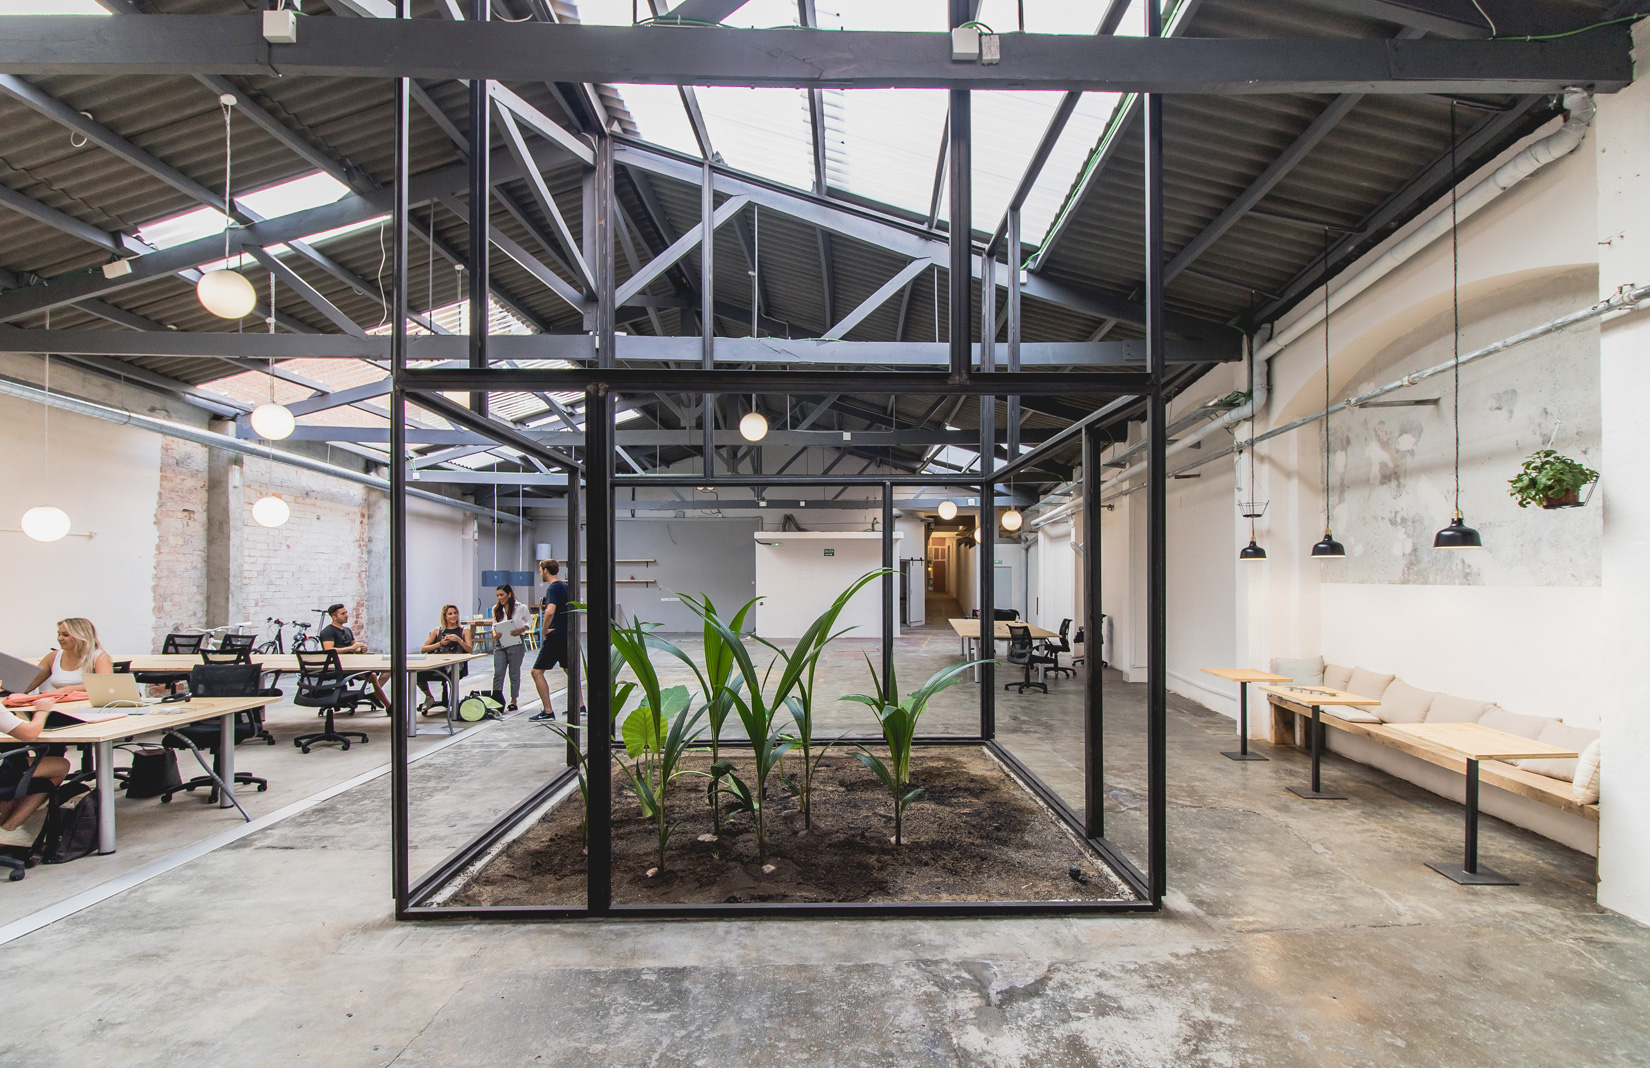 Defunct Barcelona warehouse becomes a coworking space - The Spaces